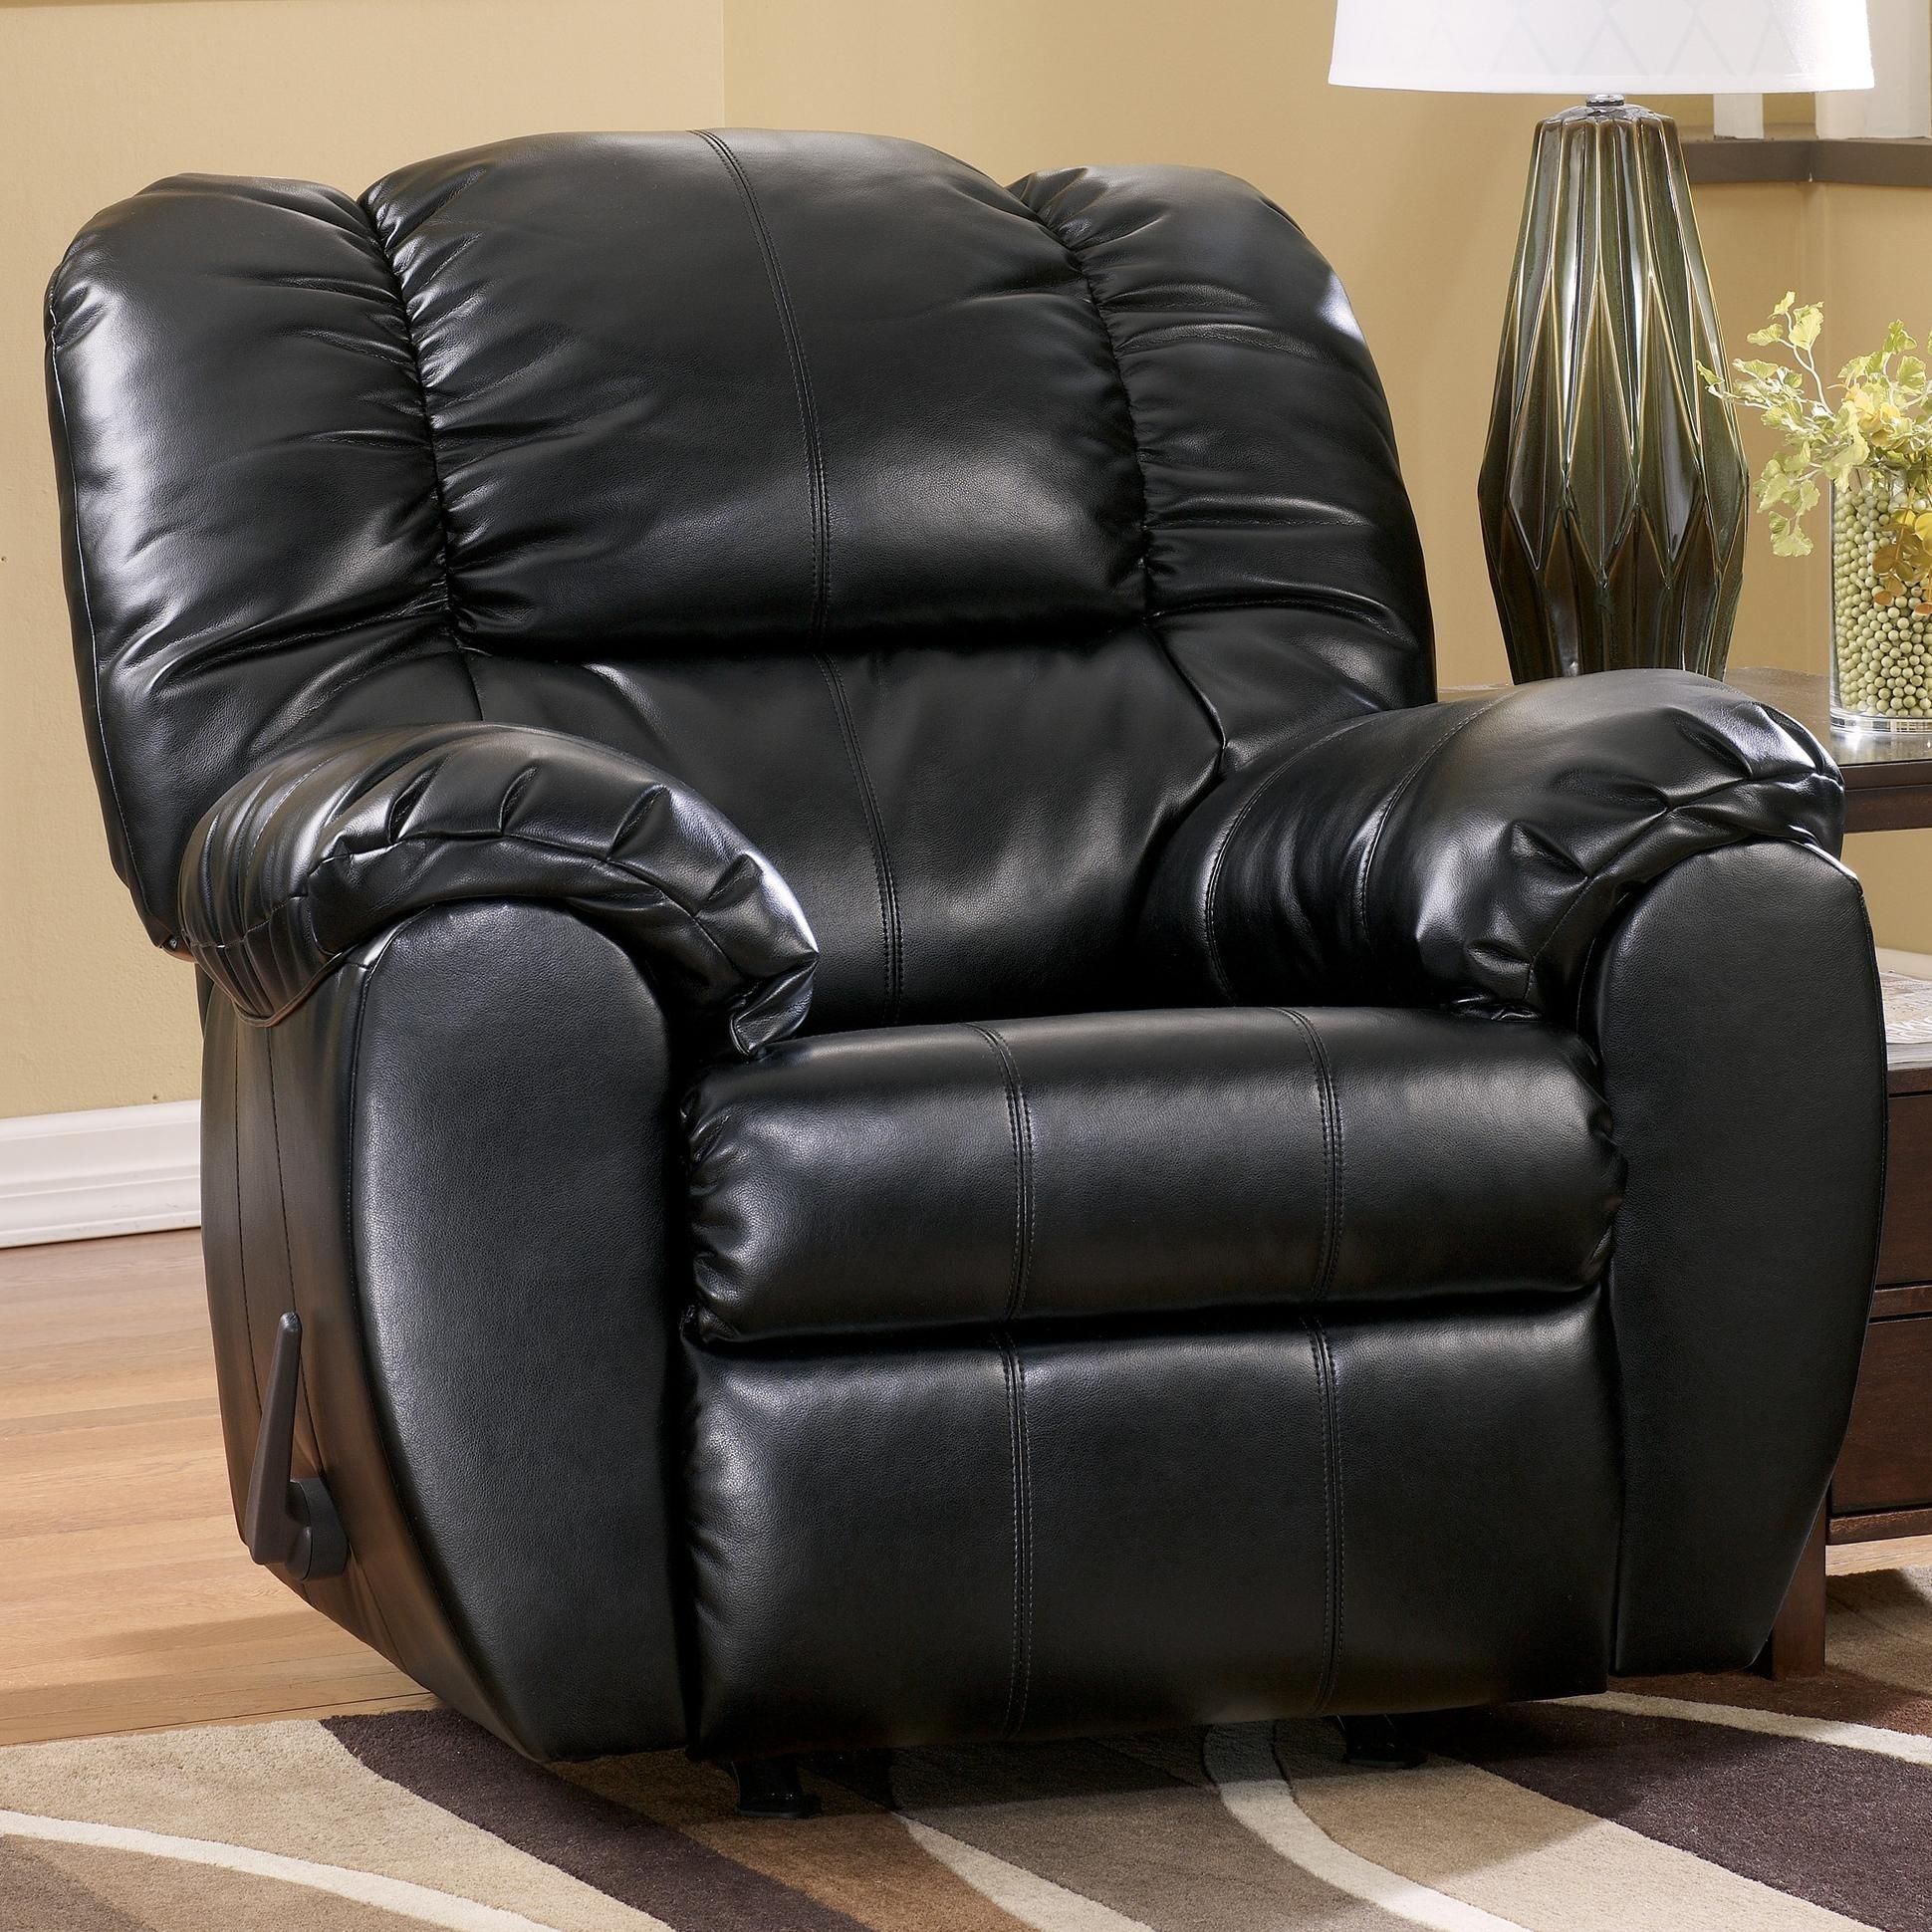 Dylan Durablend – Onyx Bonded Leather Match Rocker Recliner Pertaining To Declan 3 Piece Power Reclining Sectionals With Right Facing Console Loveseat (View 4 of 30)